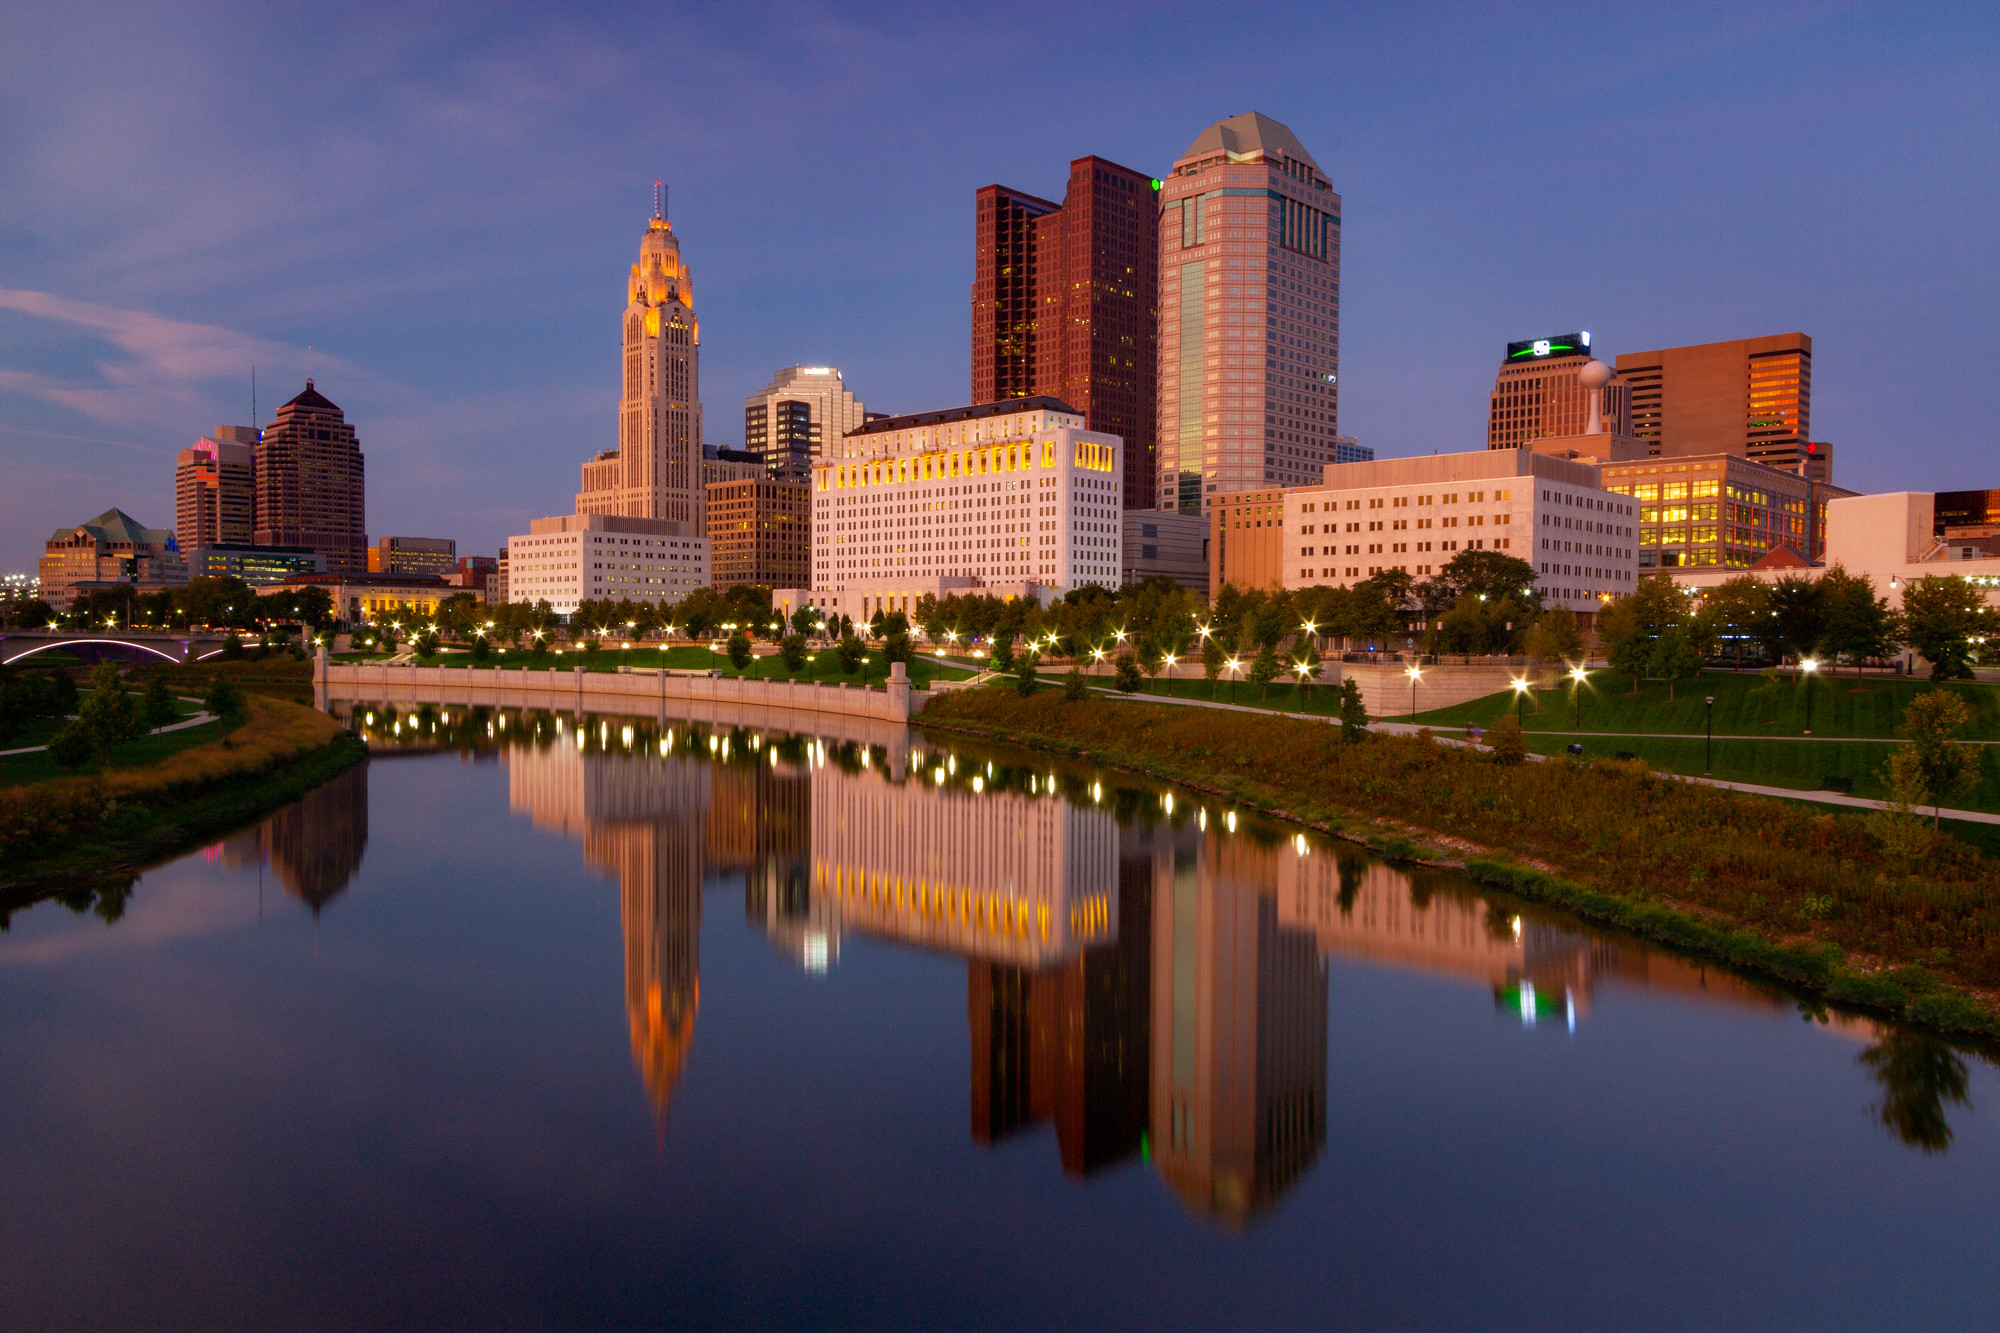 Columbus aggregation initiative aims to procure clean energy for city ratepayers. Energy News Network